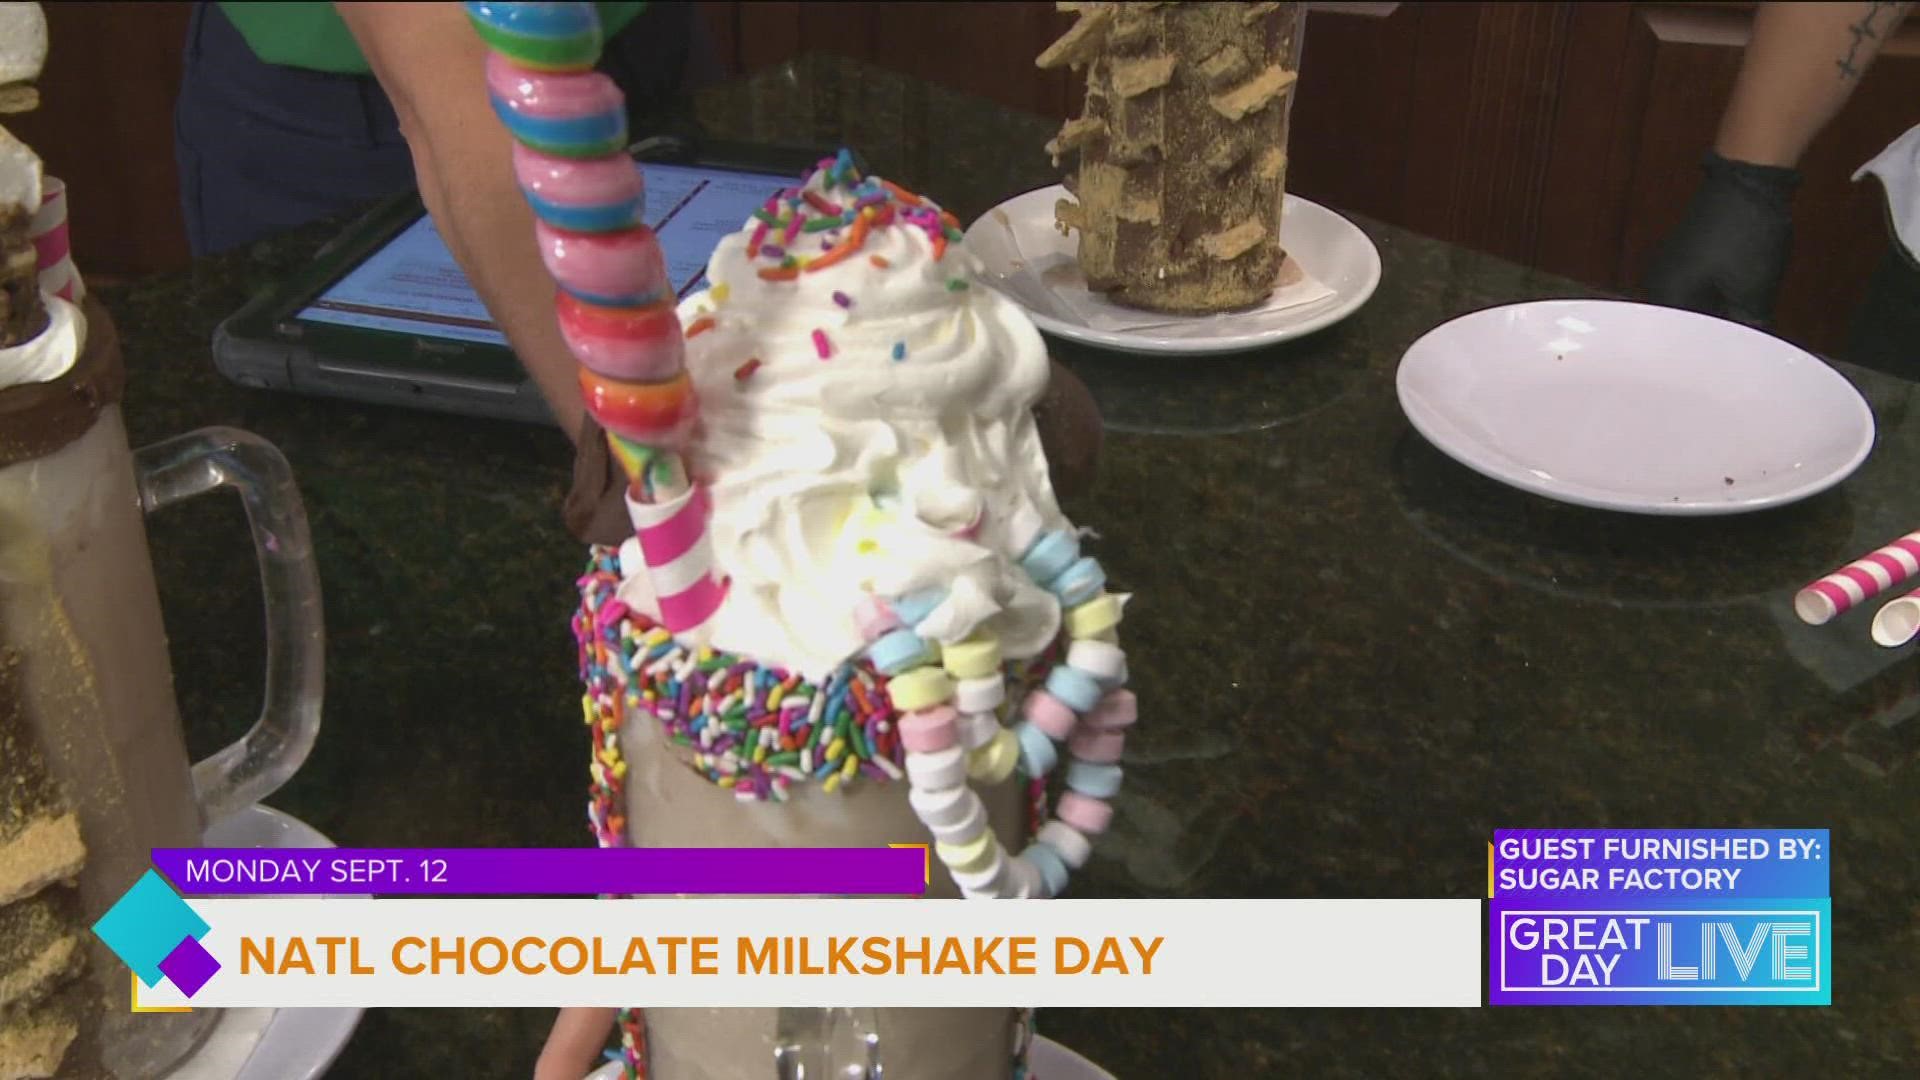 Celebrate National Chocolate milkshake day early with Sugar Factory